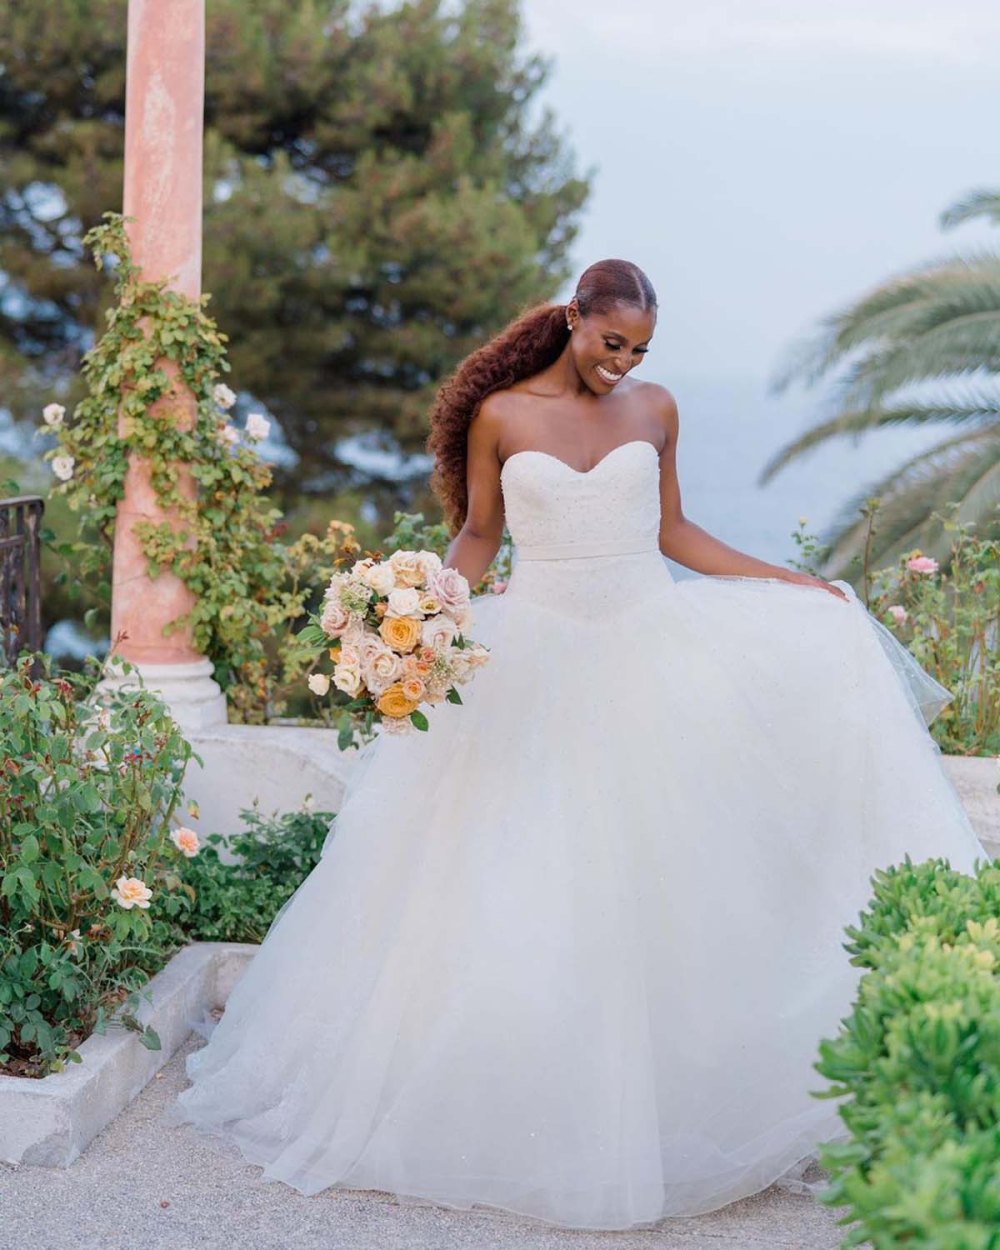 All Details Issa Raes Gorgeous Wedding Glam